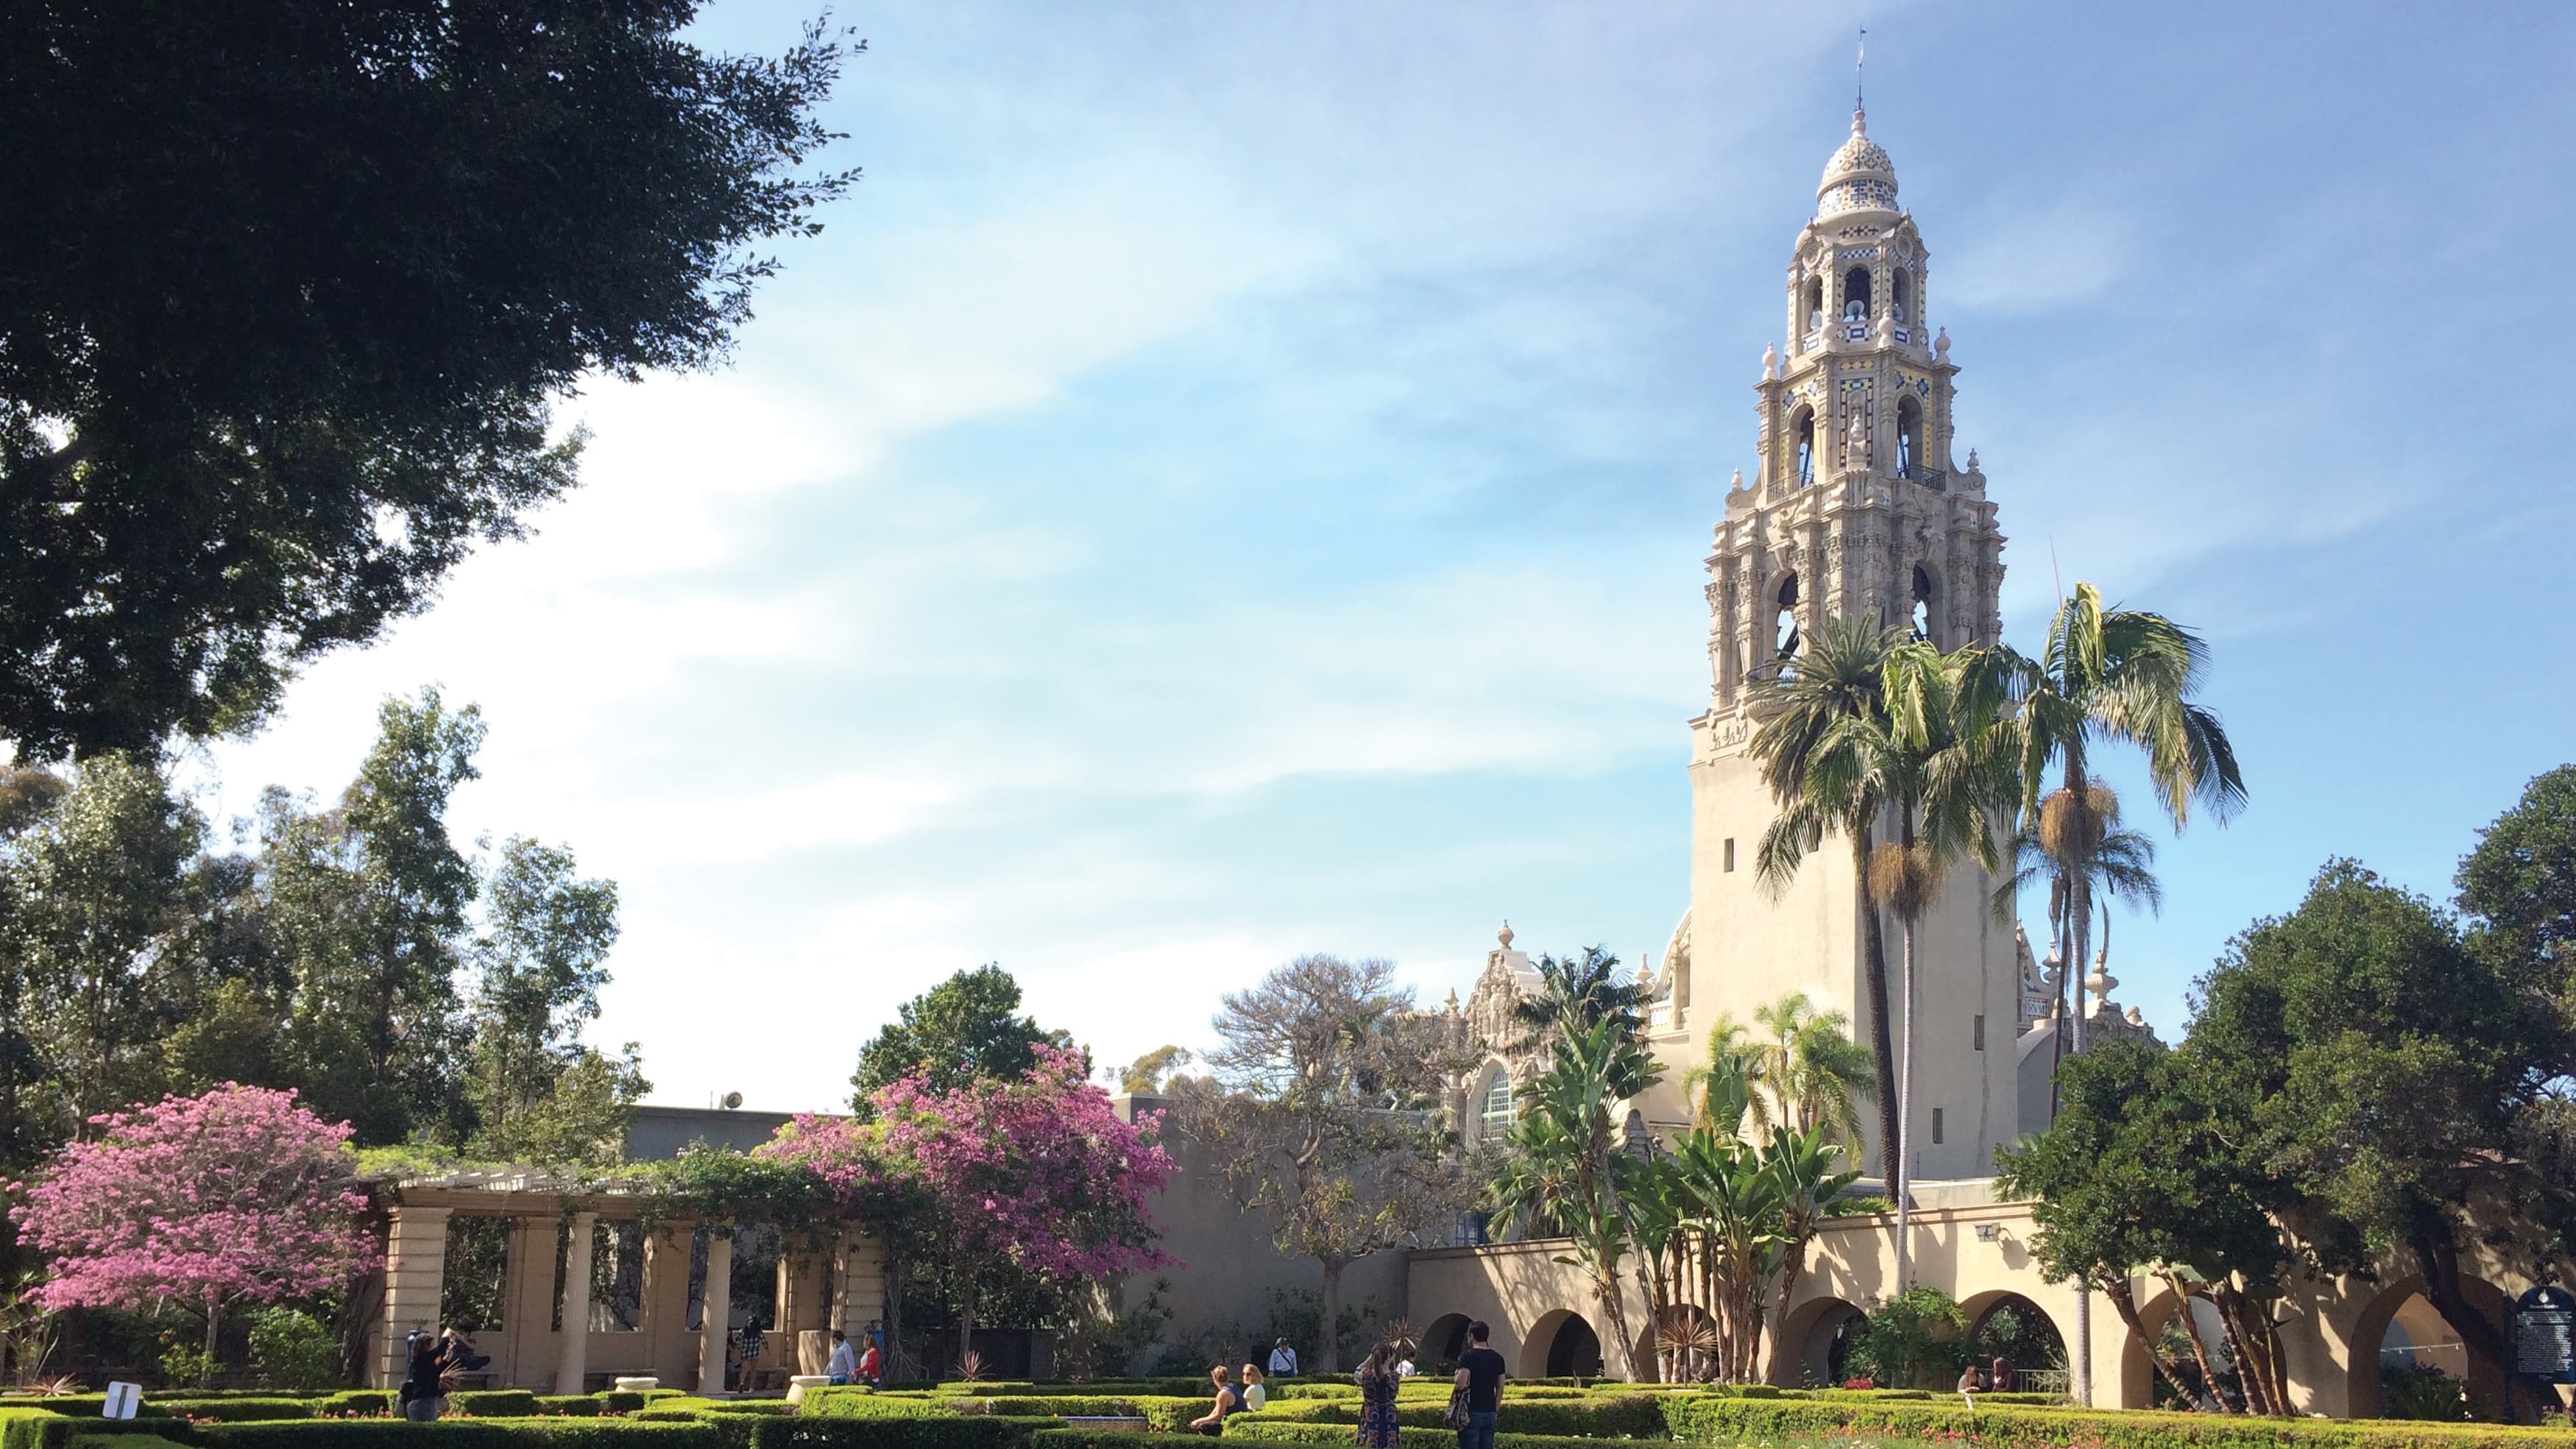 A photograph of a beautiful historical tower located in Balboa Park.